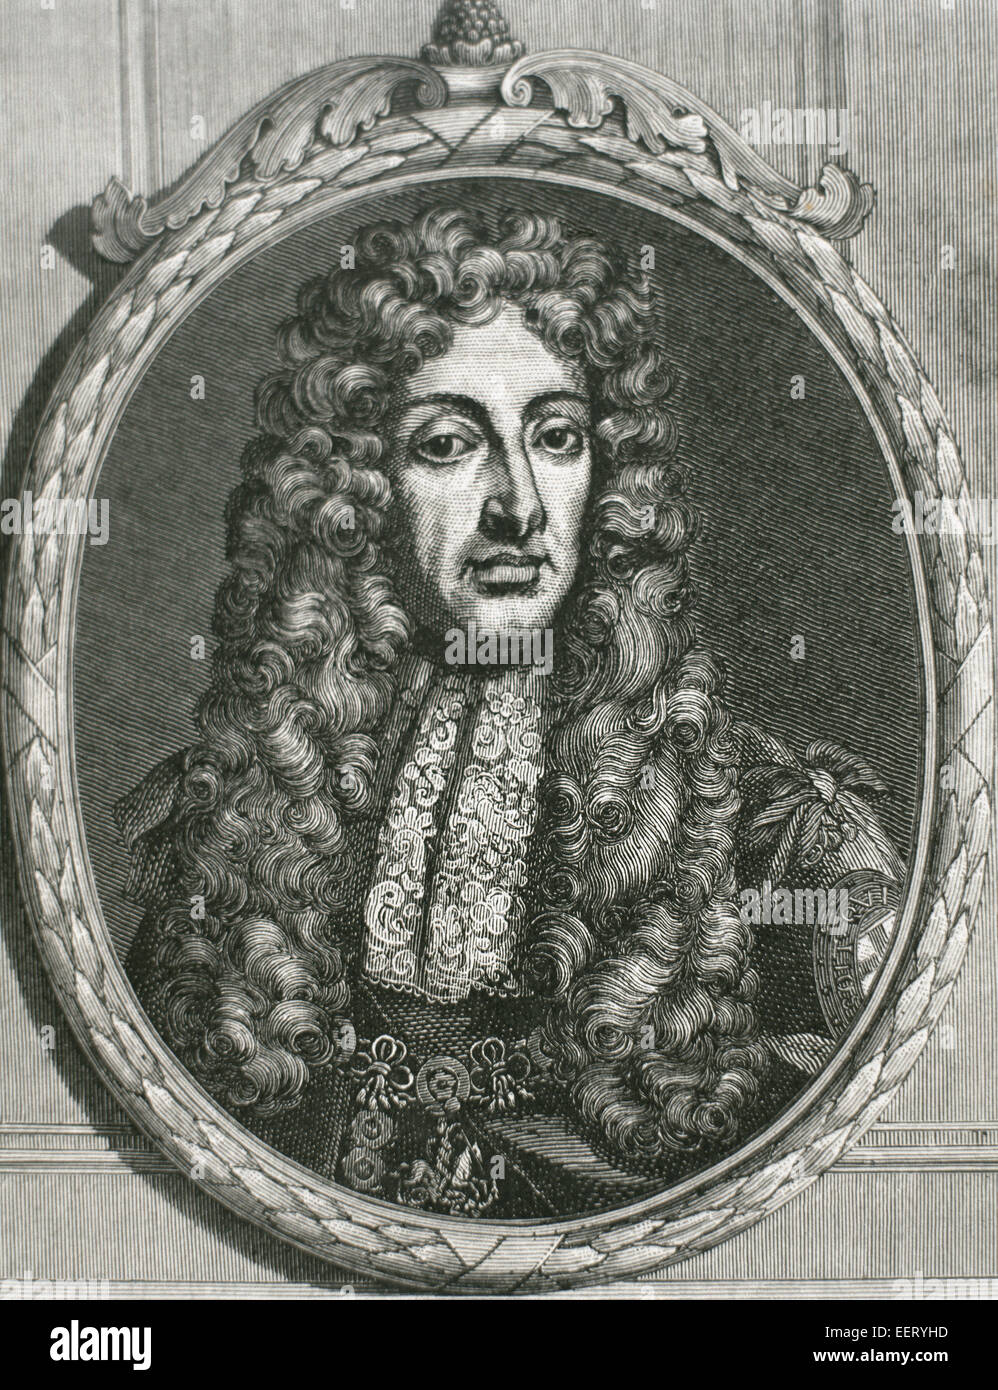 James II and VII (1633-1701). King of England and Ireland as James II and king of Scotland as James VII (1685-1688). Portrait. Engraving. Stock Photo